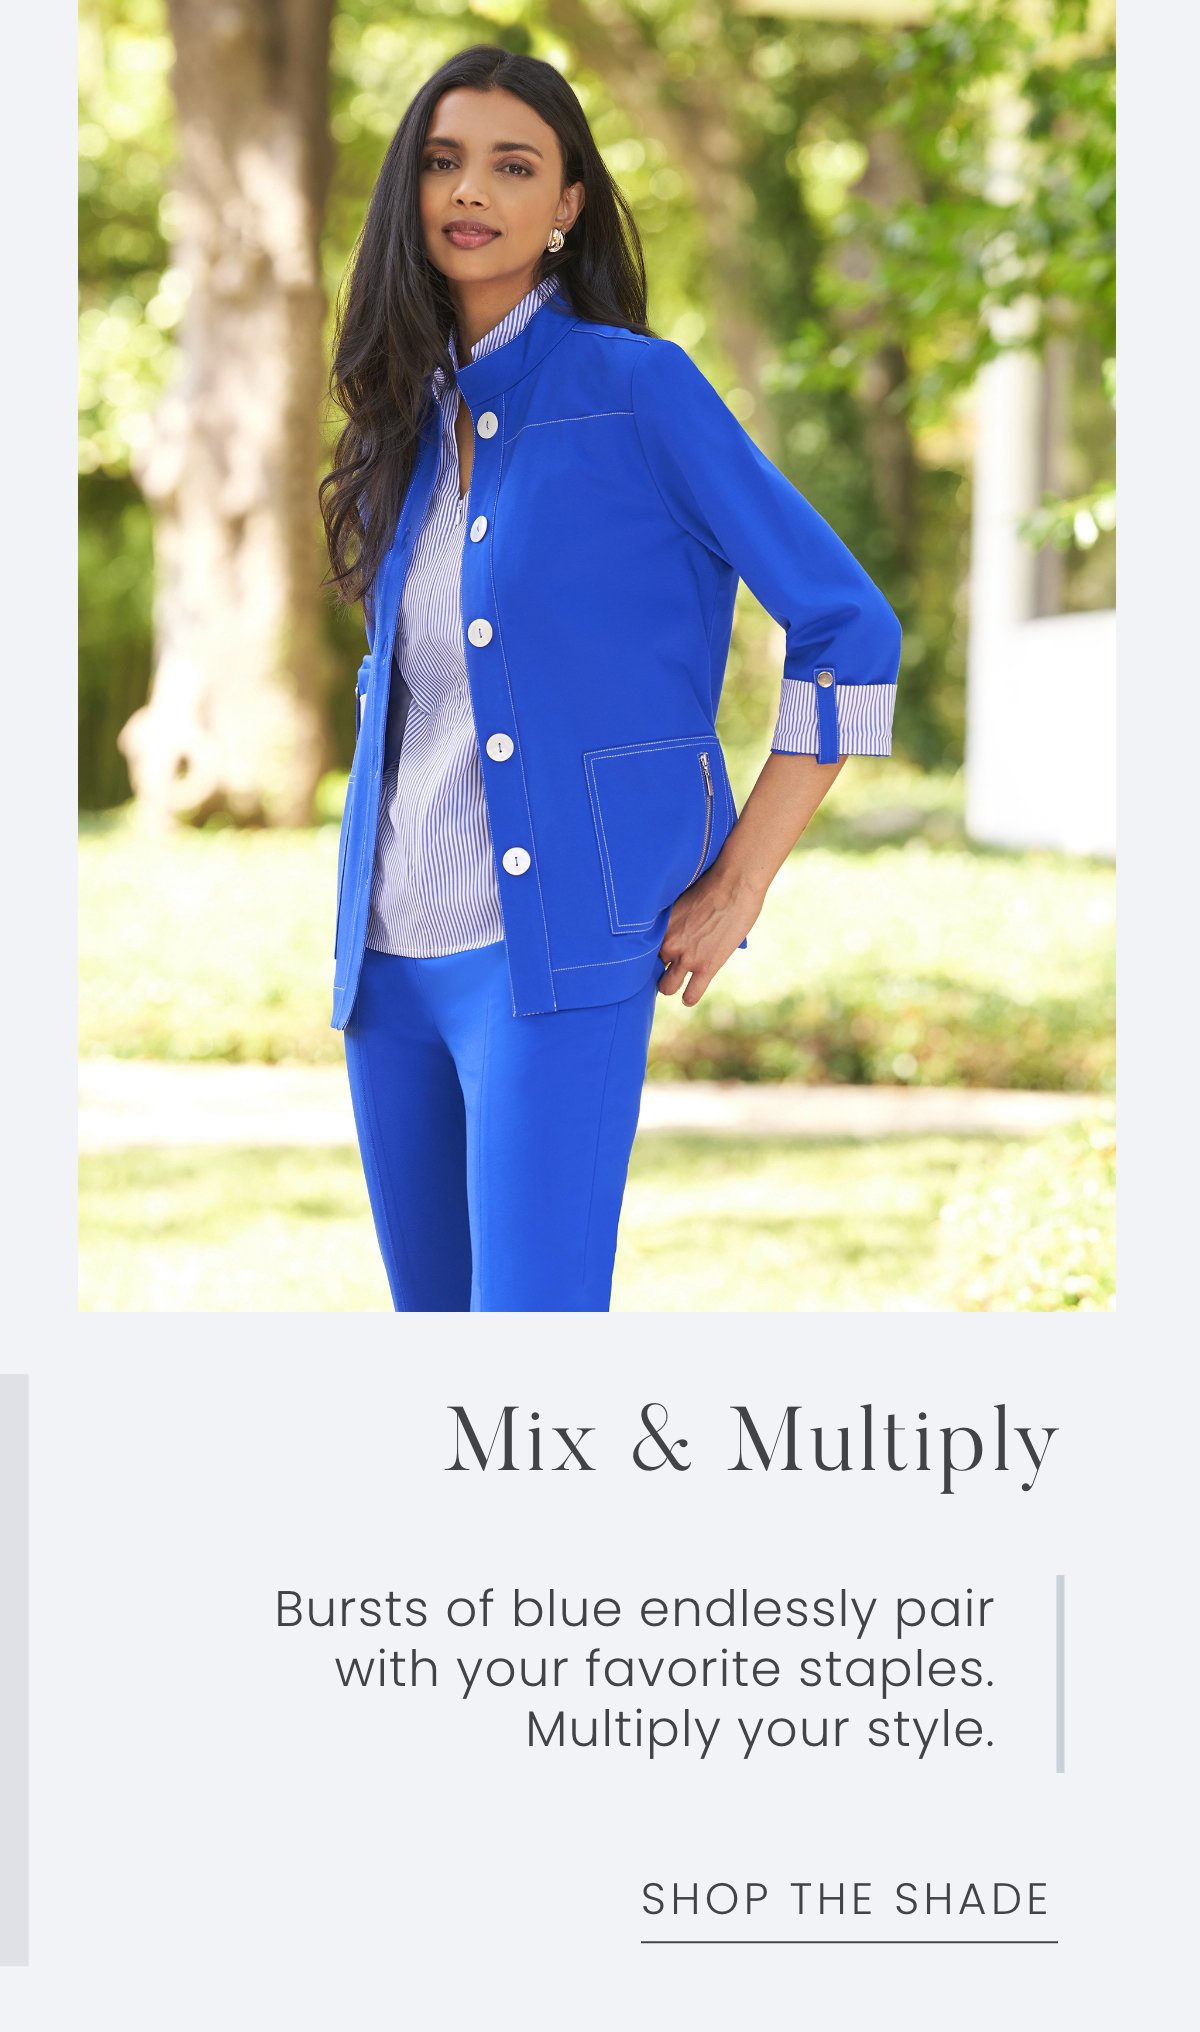 Mix & Multiply - Bursts of blue endlessly pair with your favorite staples. Multiply your style. Shop the Shade >>